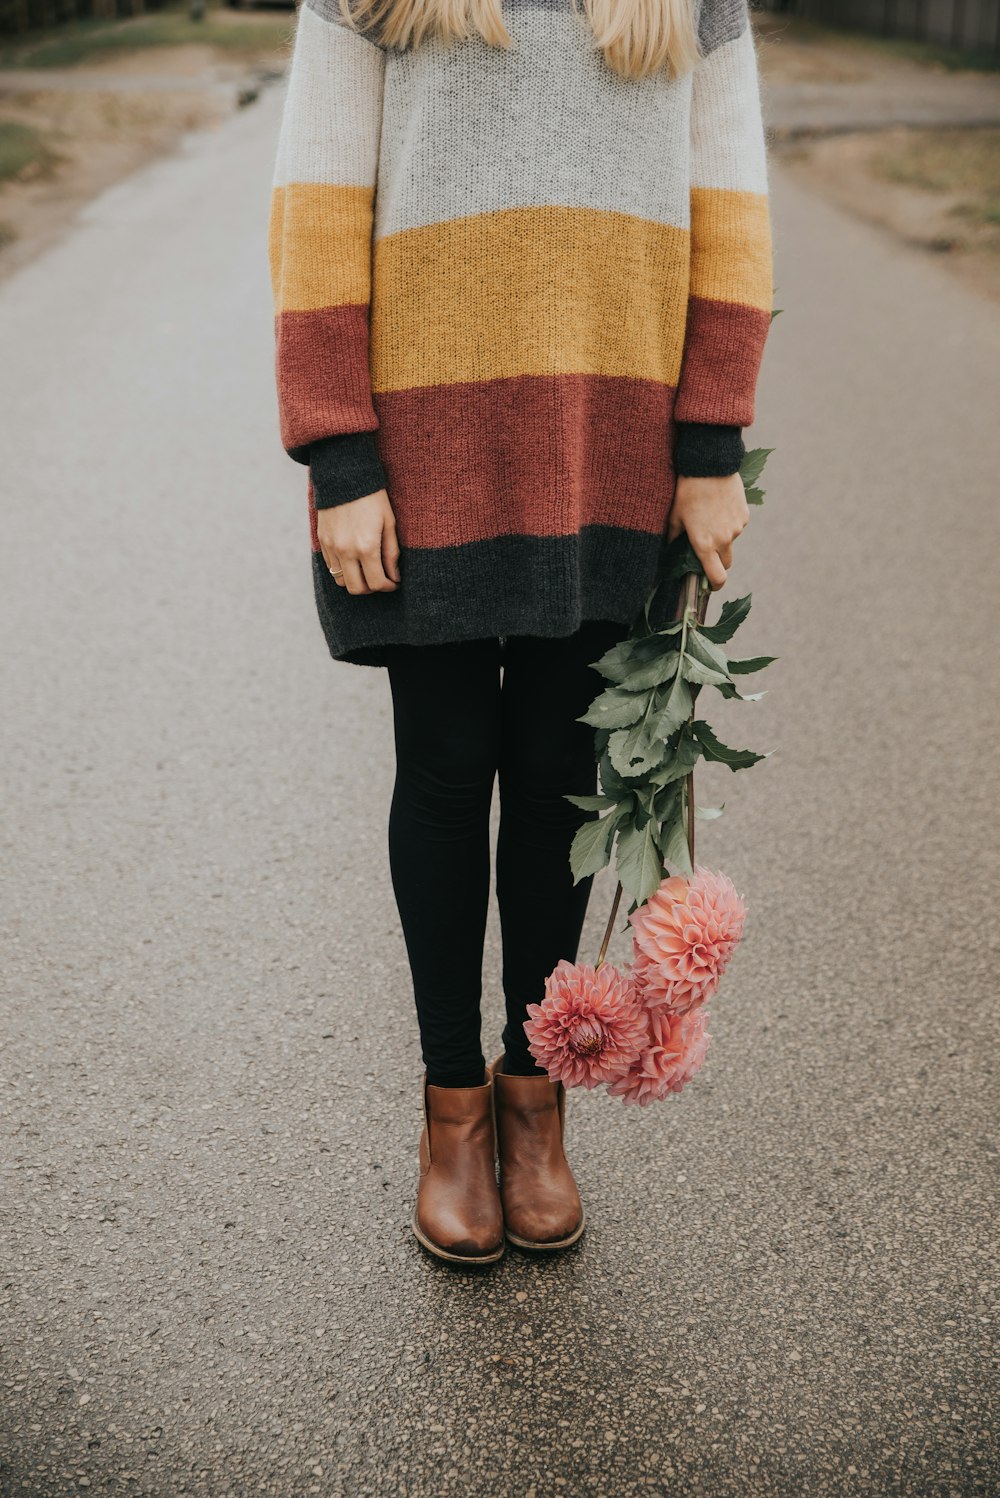 a woman in a striped sweater holding a bouquet of flowers